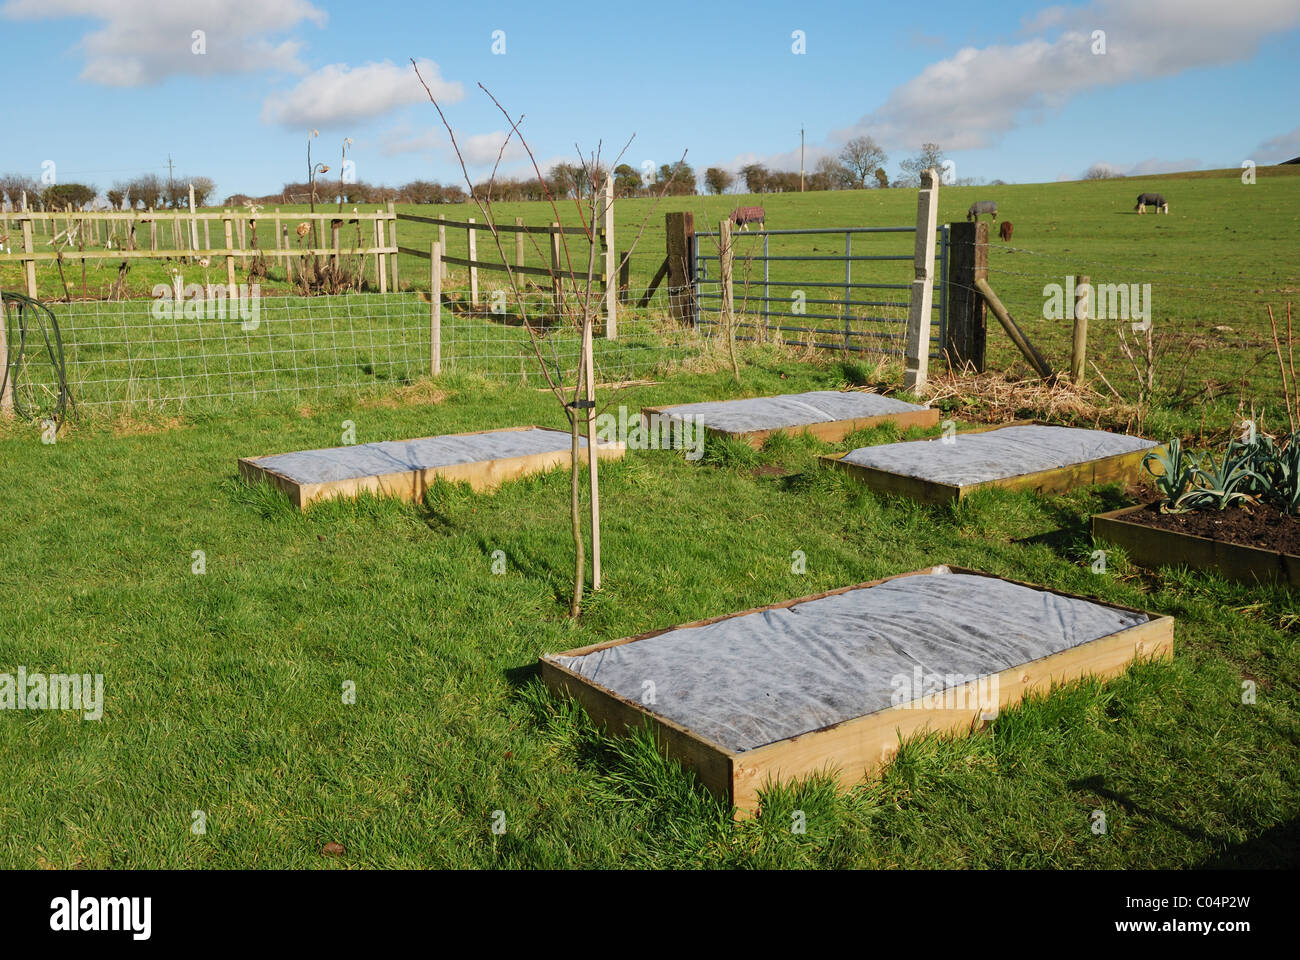 Raised vegetable beds covered in horticultural fleece. Lincolnshire, England. Stock Photo